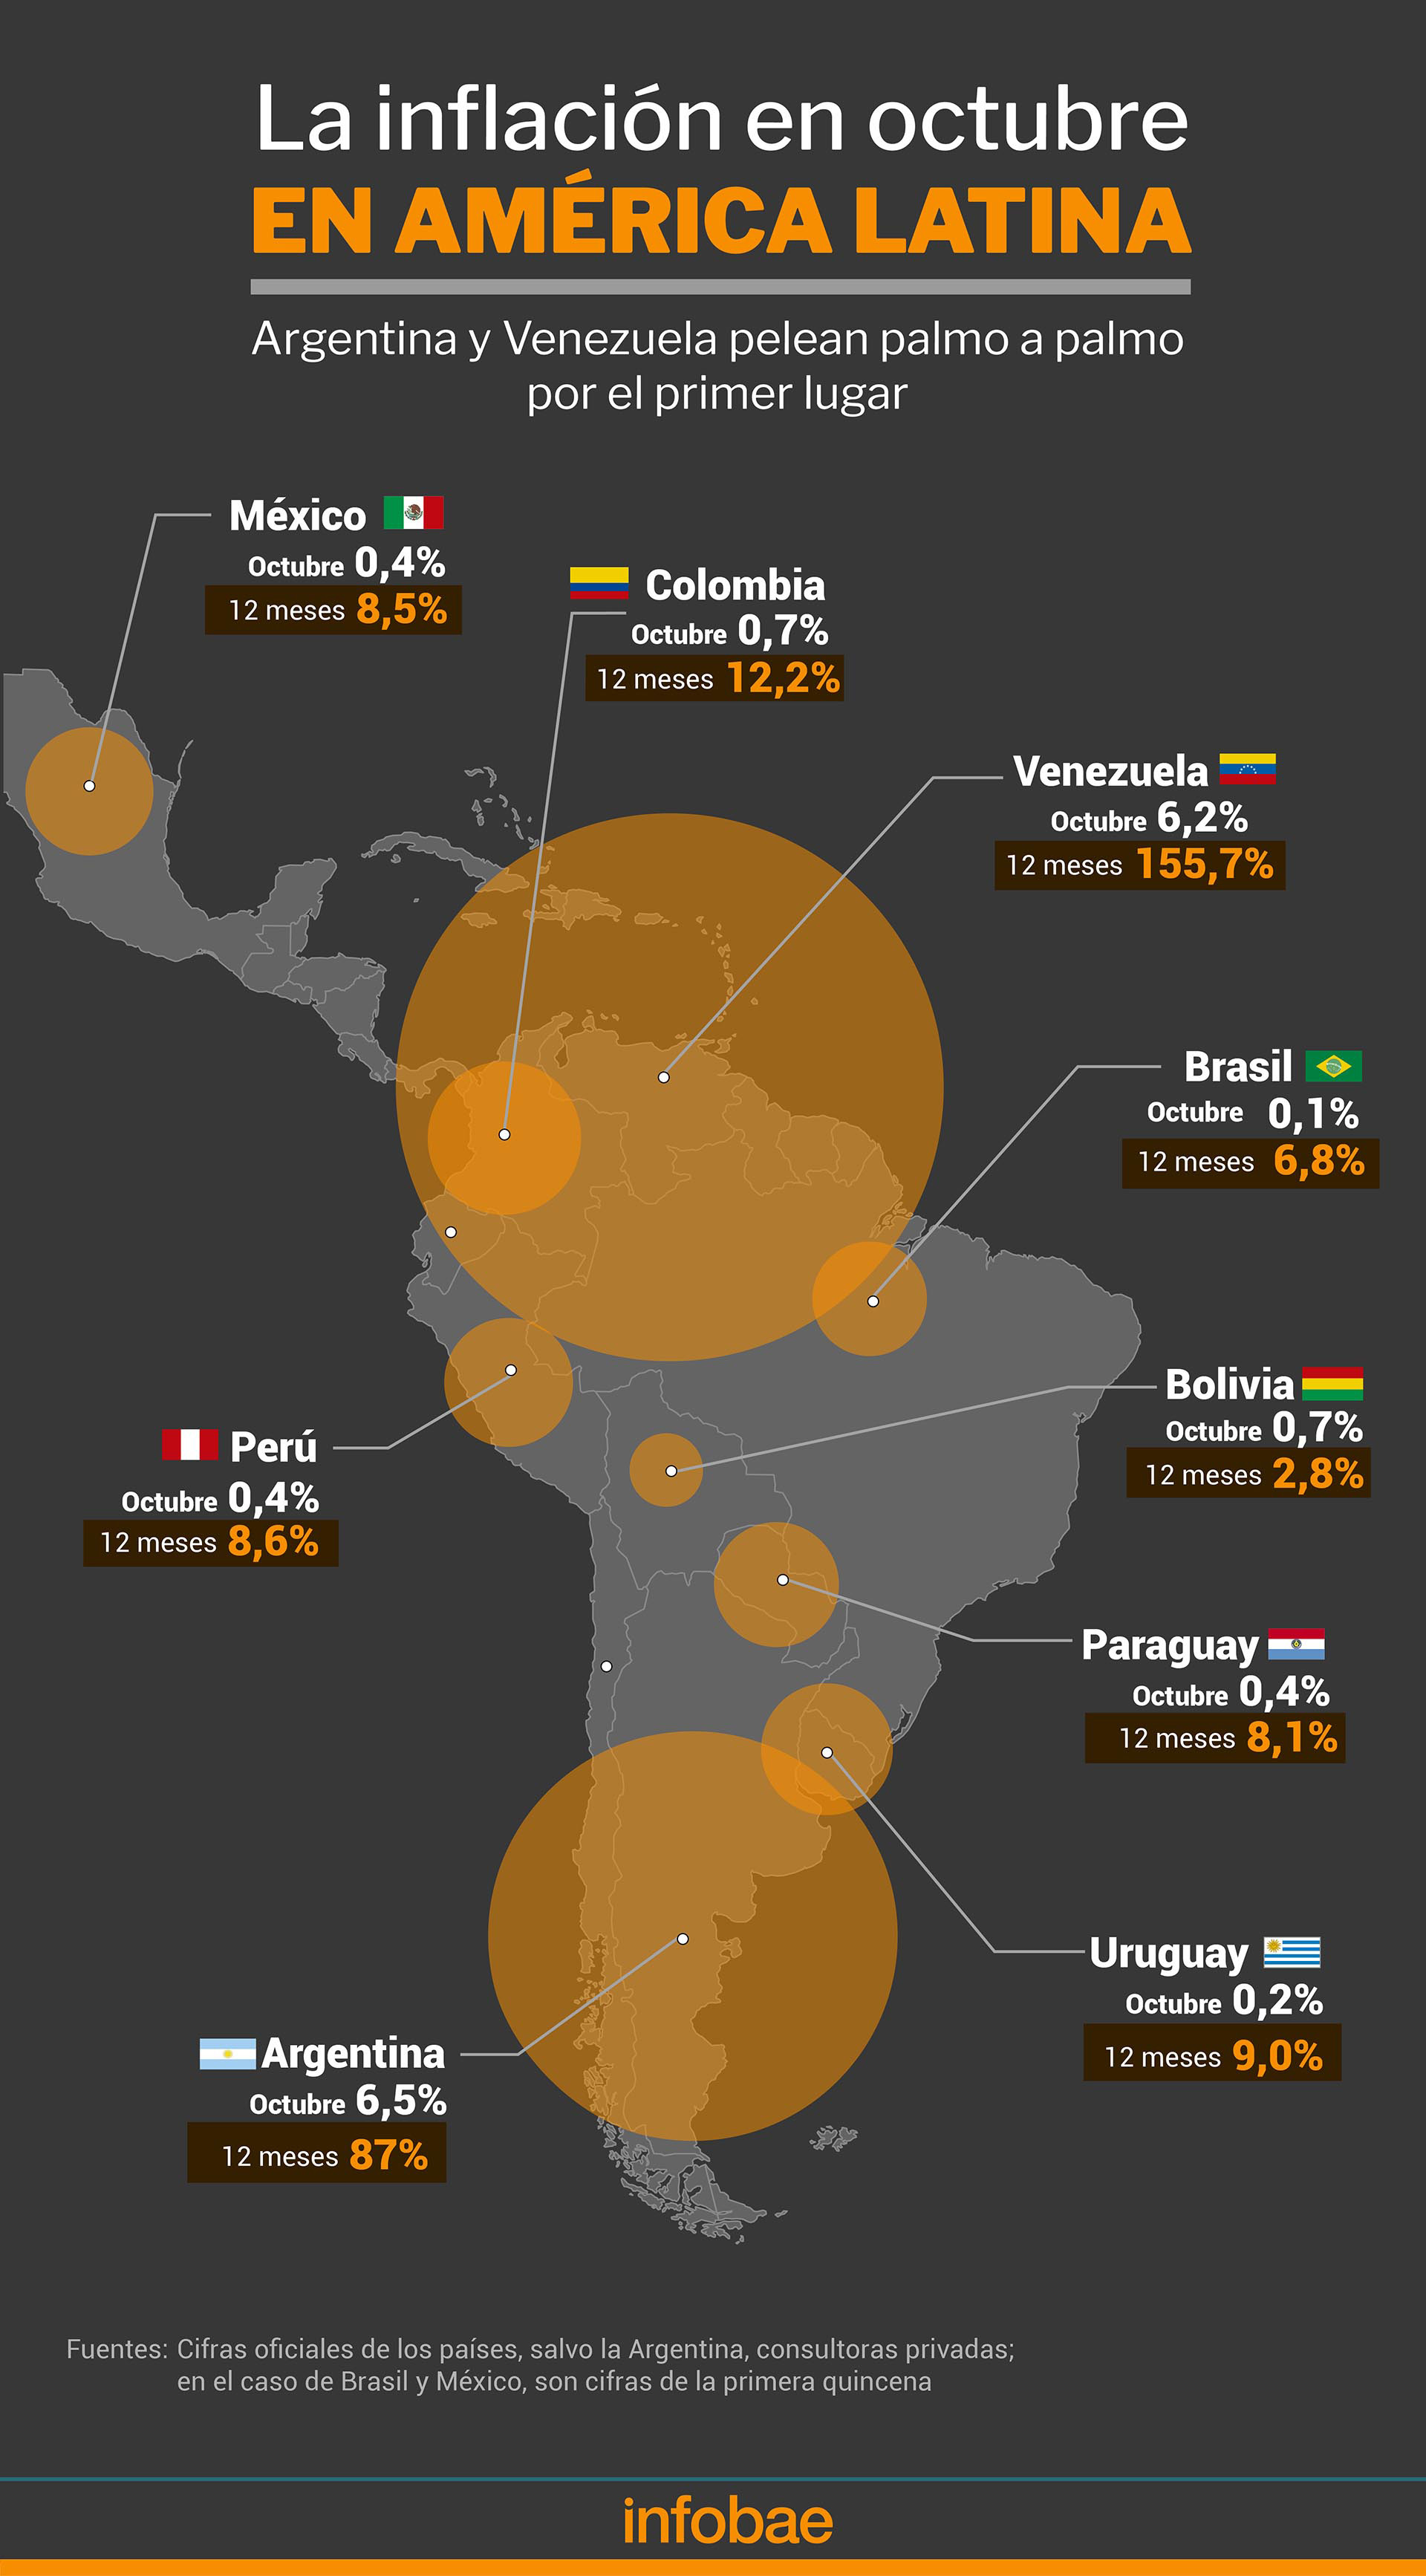     Infographic October Inflation Chart for Latin America by Marcelo Regalado